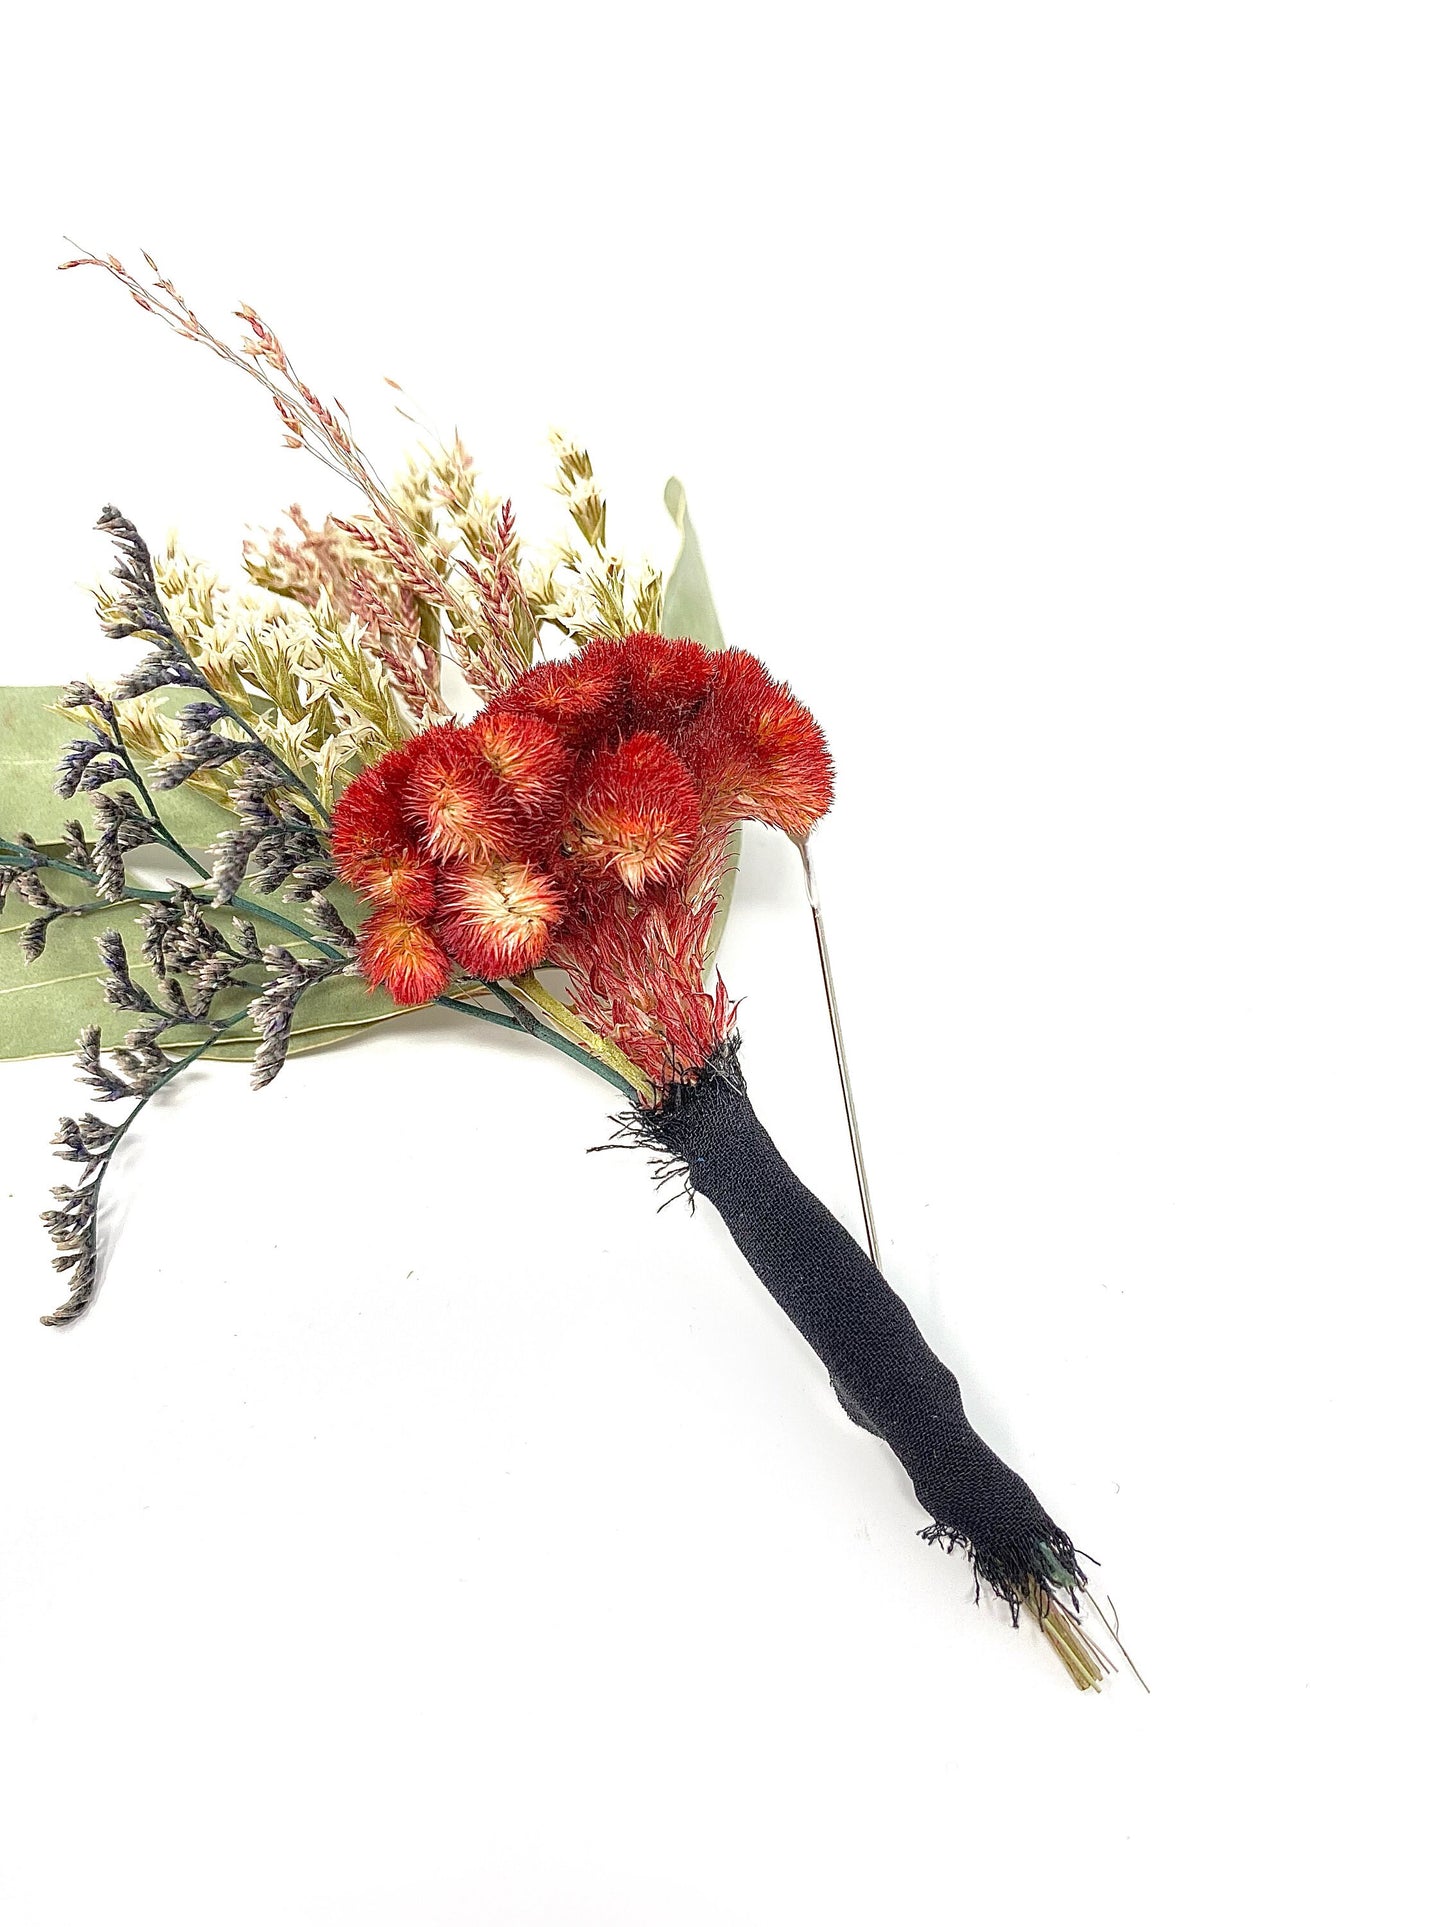 Boutonniere, Dried Flowers, Preserved Floral, Wedding Accessories, Coxcomb, Greenery, Caspia, Bridal